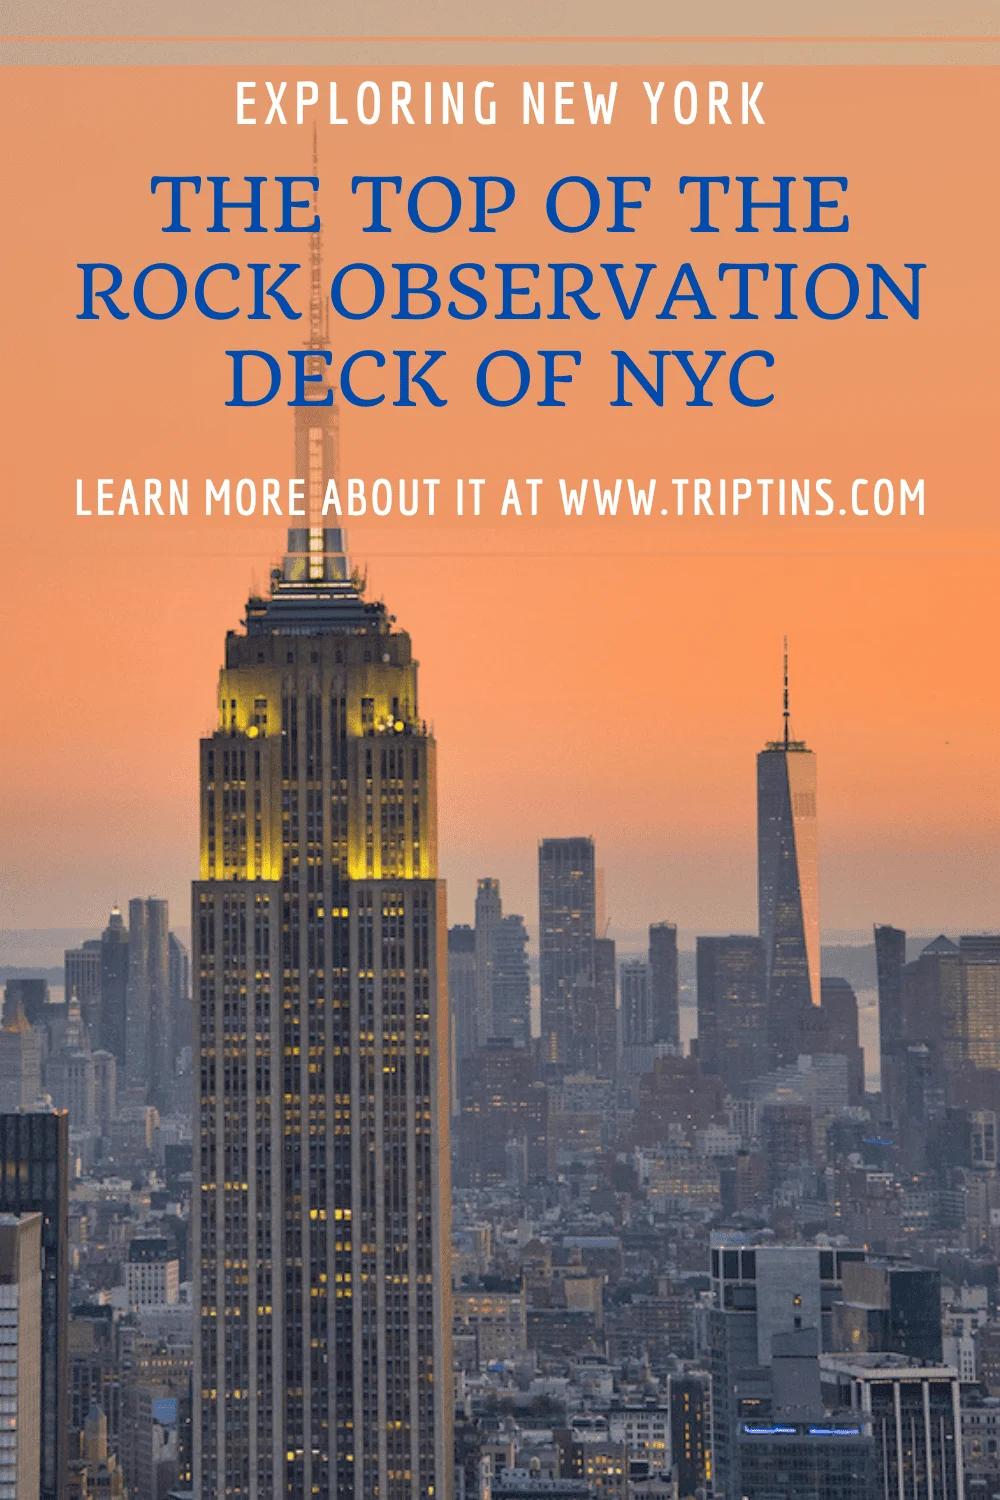 Top of the Rock Observation Deck in NYC